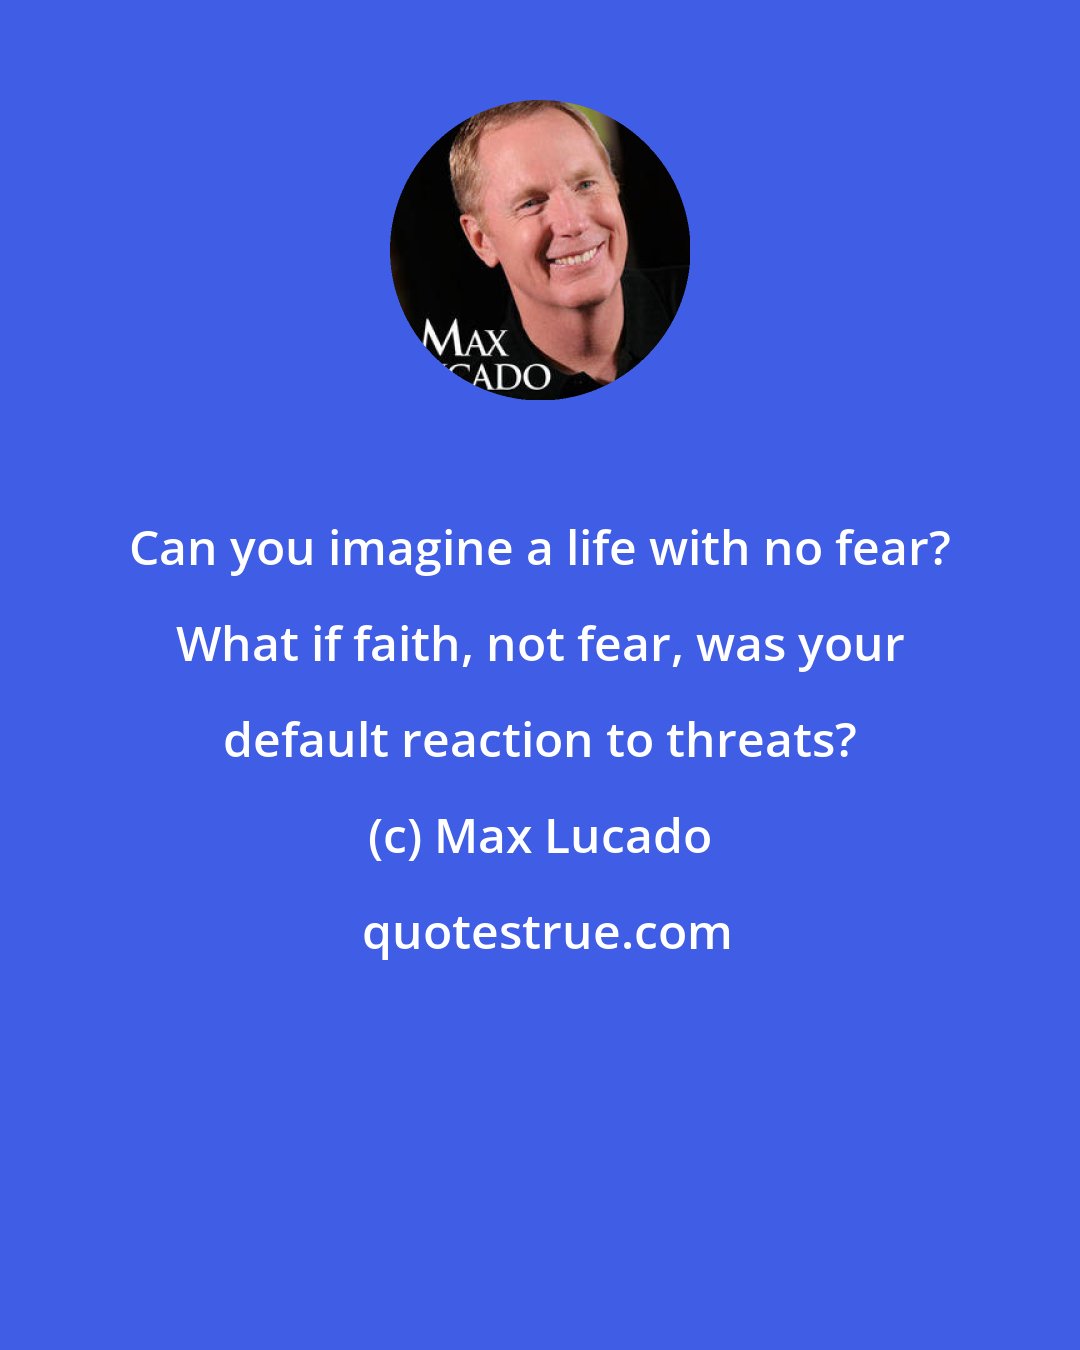 Max Lucado: Can you imagine a life with no fear? What if faith, not fear, was your default reaction to threats?